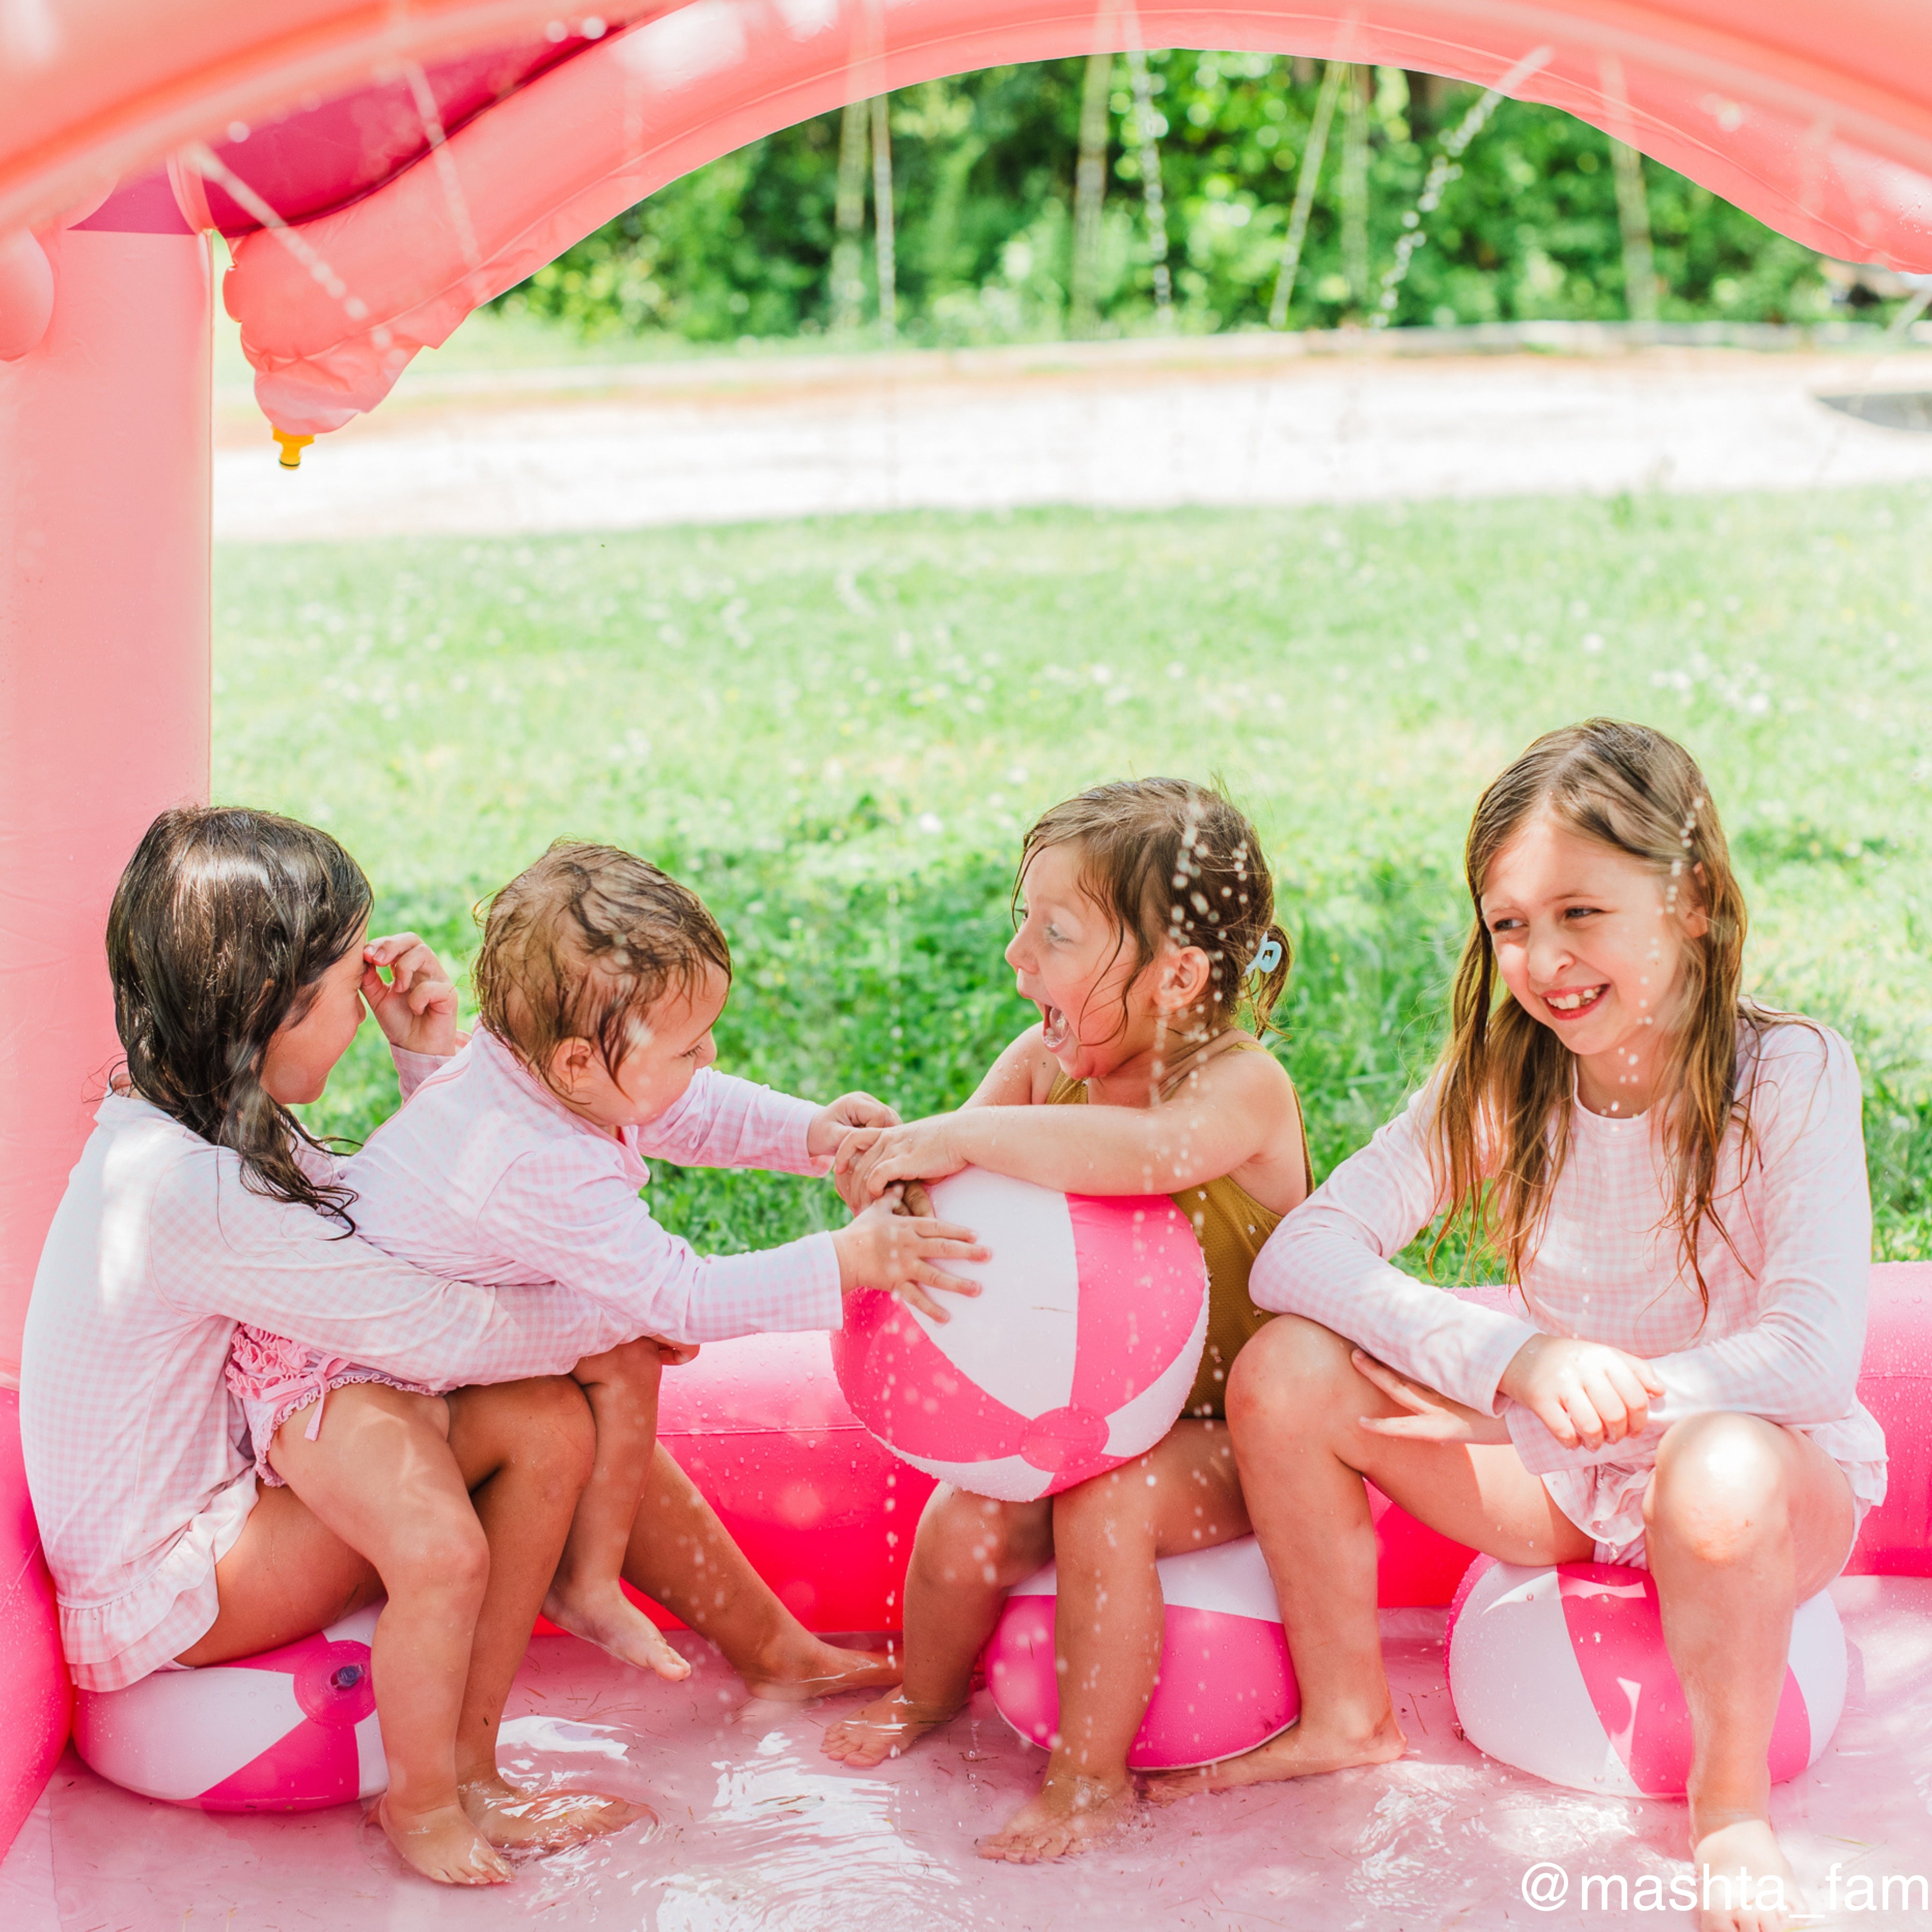 four young girls play together in the pink castle kiddie pool sprinkler